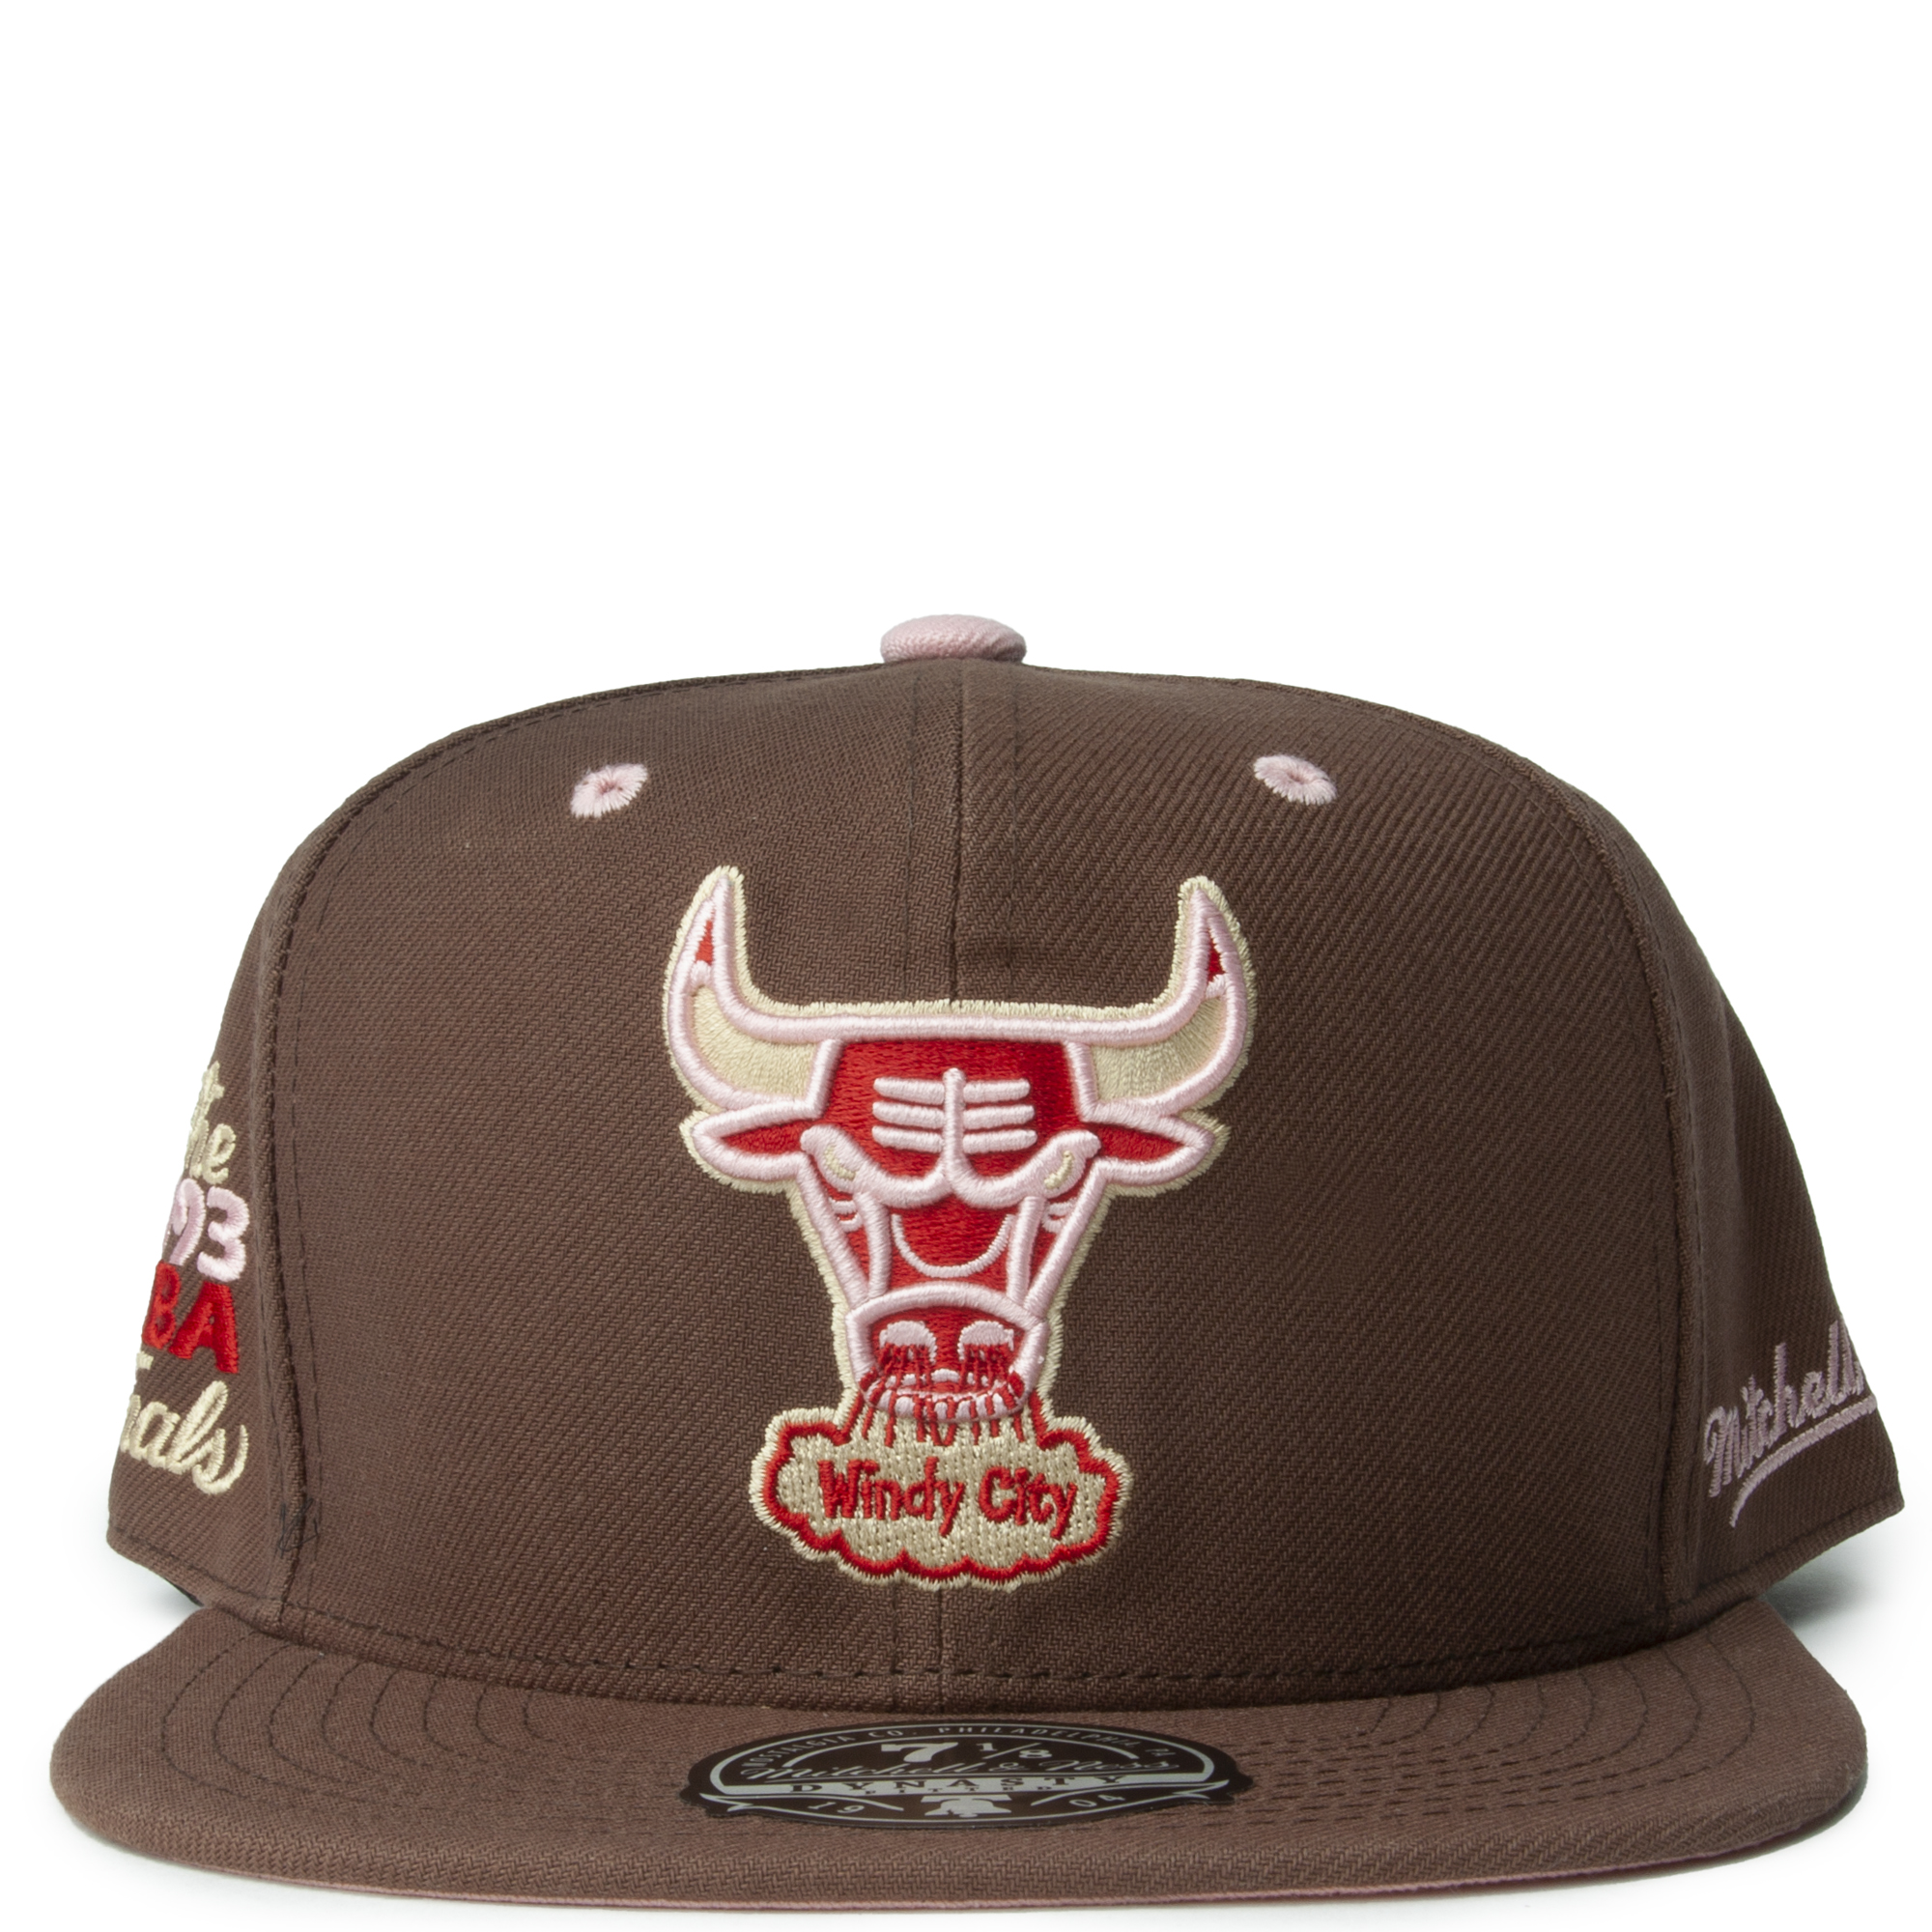 New Era Caps Chicago Bulls Scribble Fitted Hat